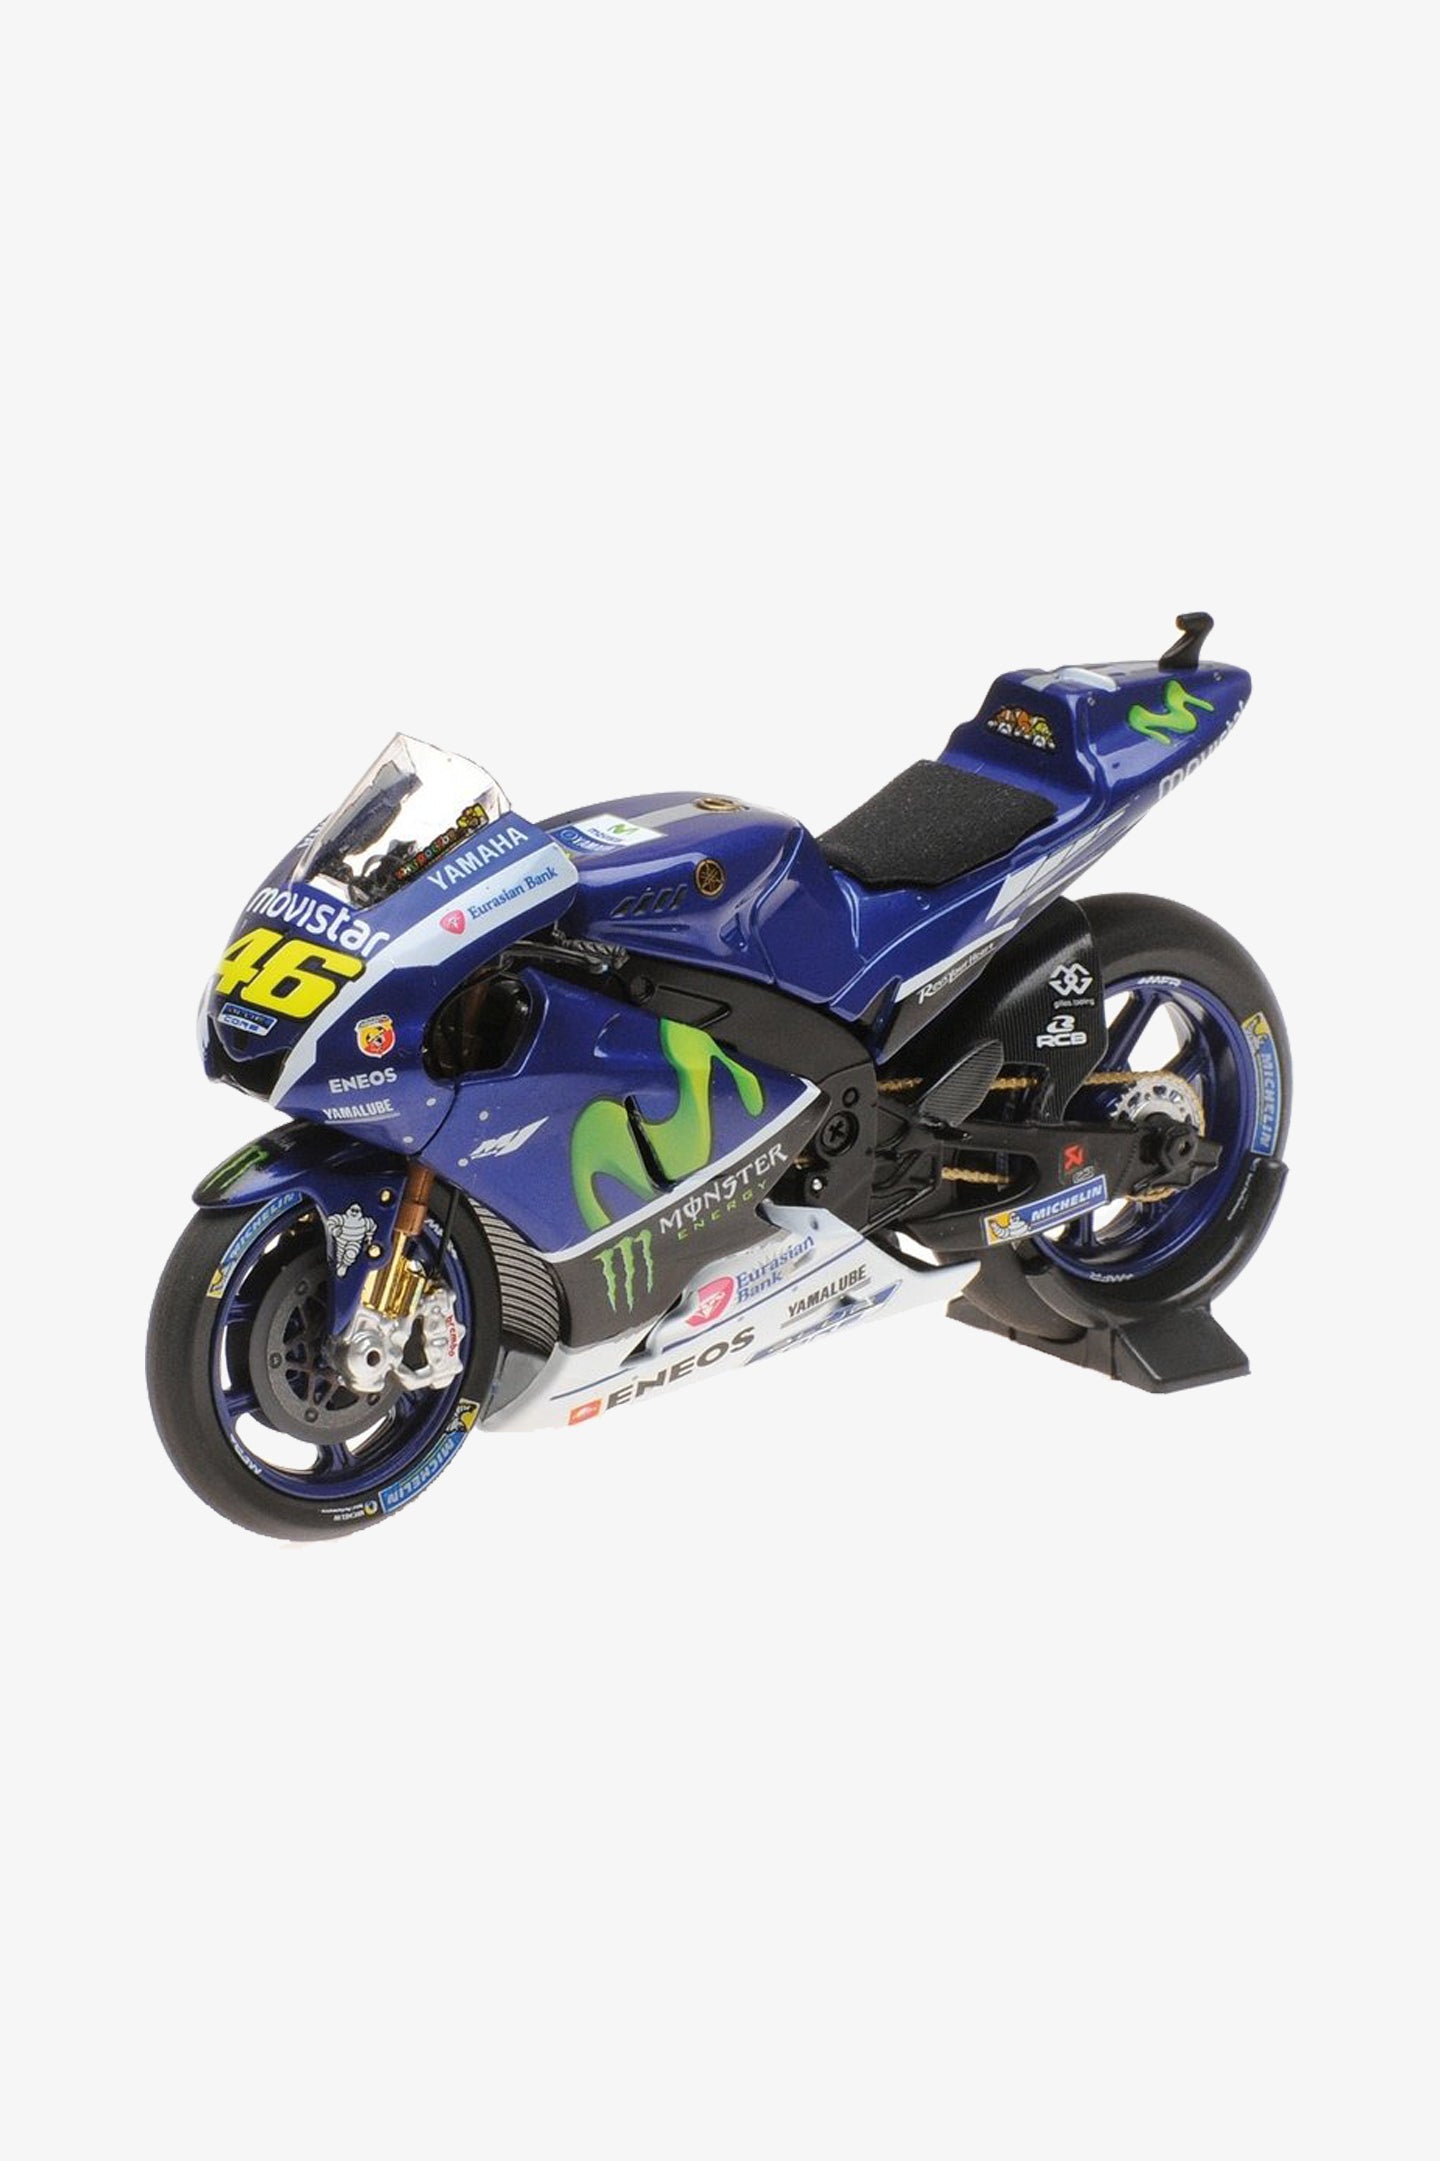 OPO 10 - Motorcycle 1/18 of The Doctor Valentino Rossi #46, Reproduction  Compatible with Yamaha YZR-M1 Excalibur - Sepang Test 2007 - VR037